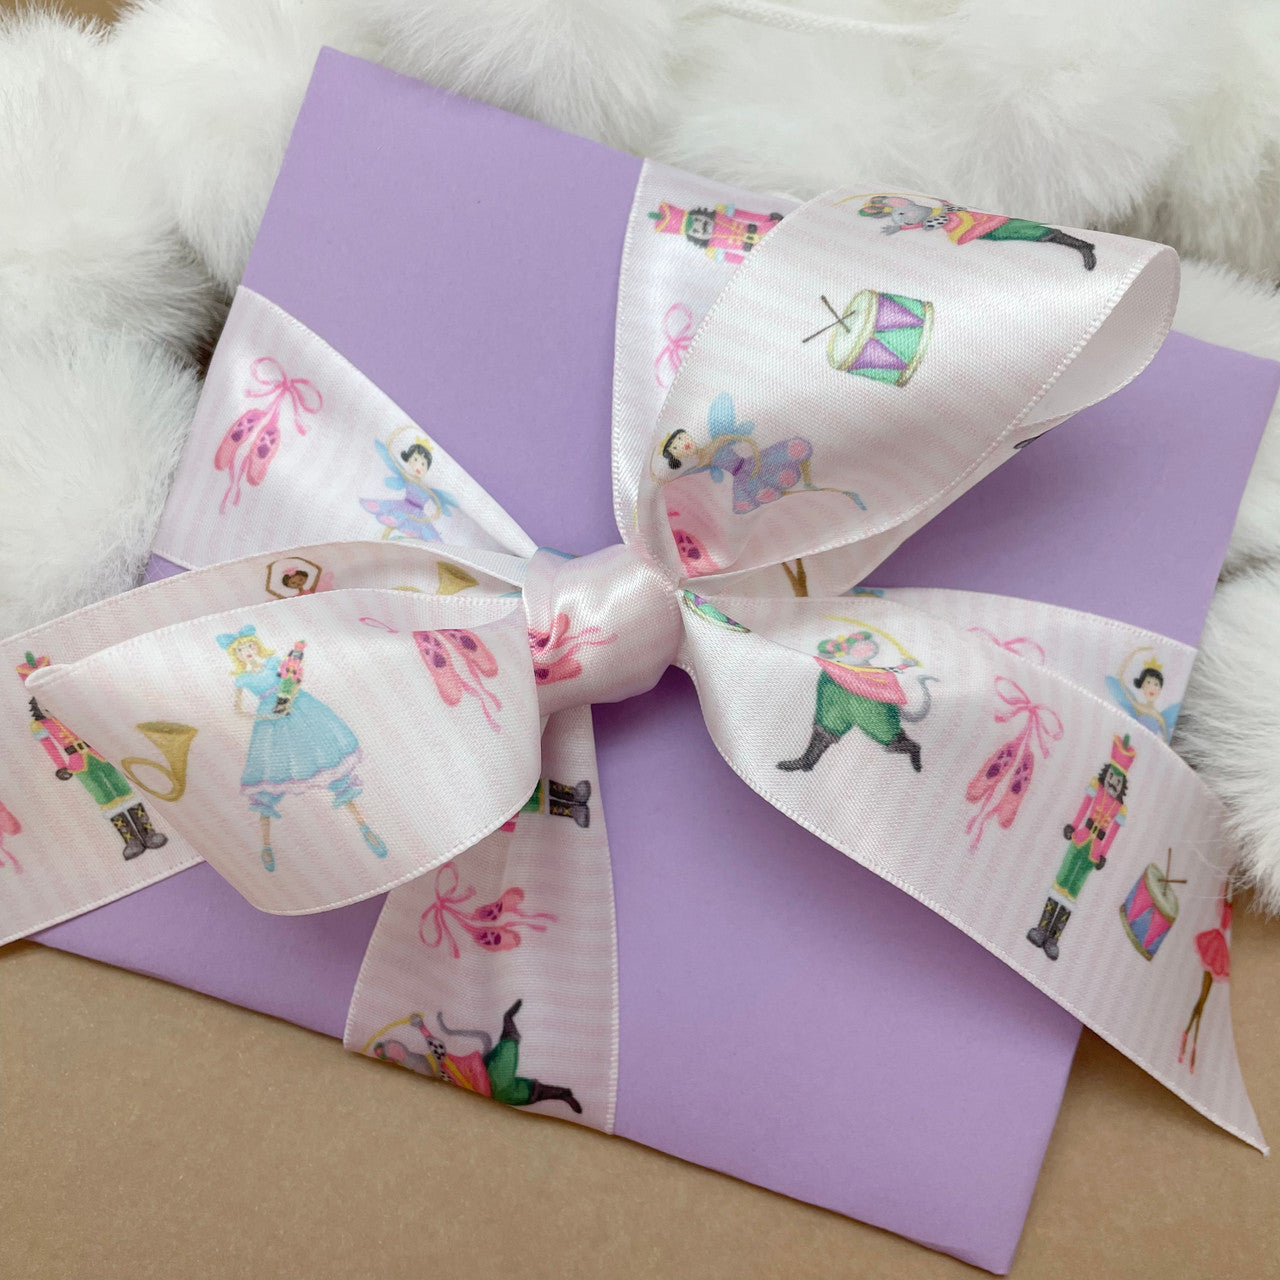 What a beautiful package this lovely Nutcracker ribbon makes for your favorite ballerina! 